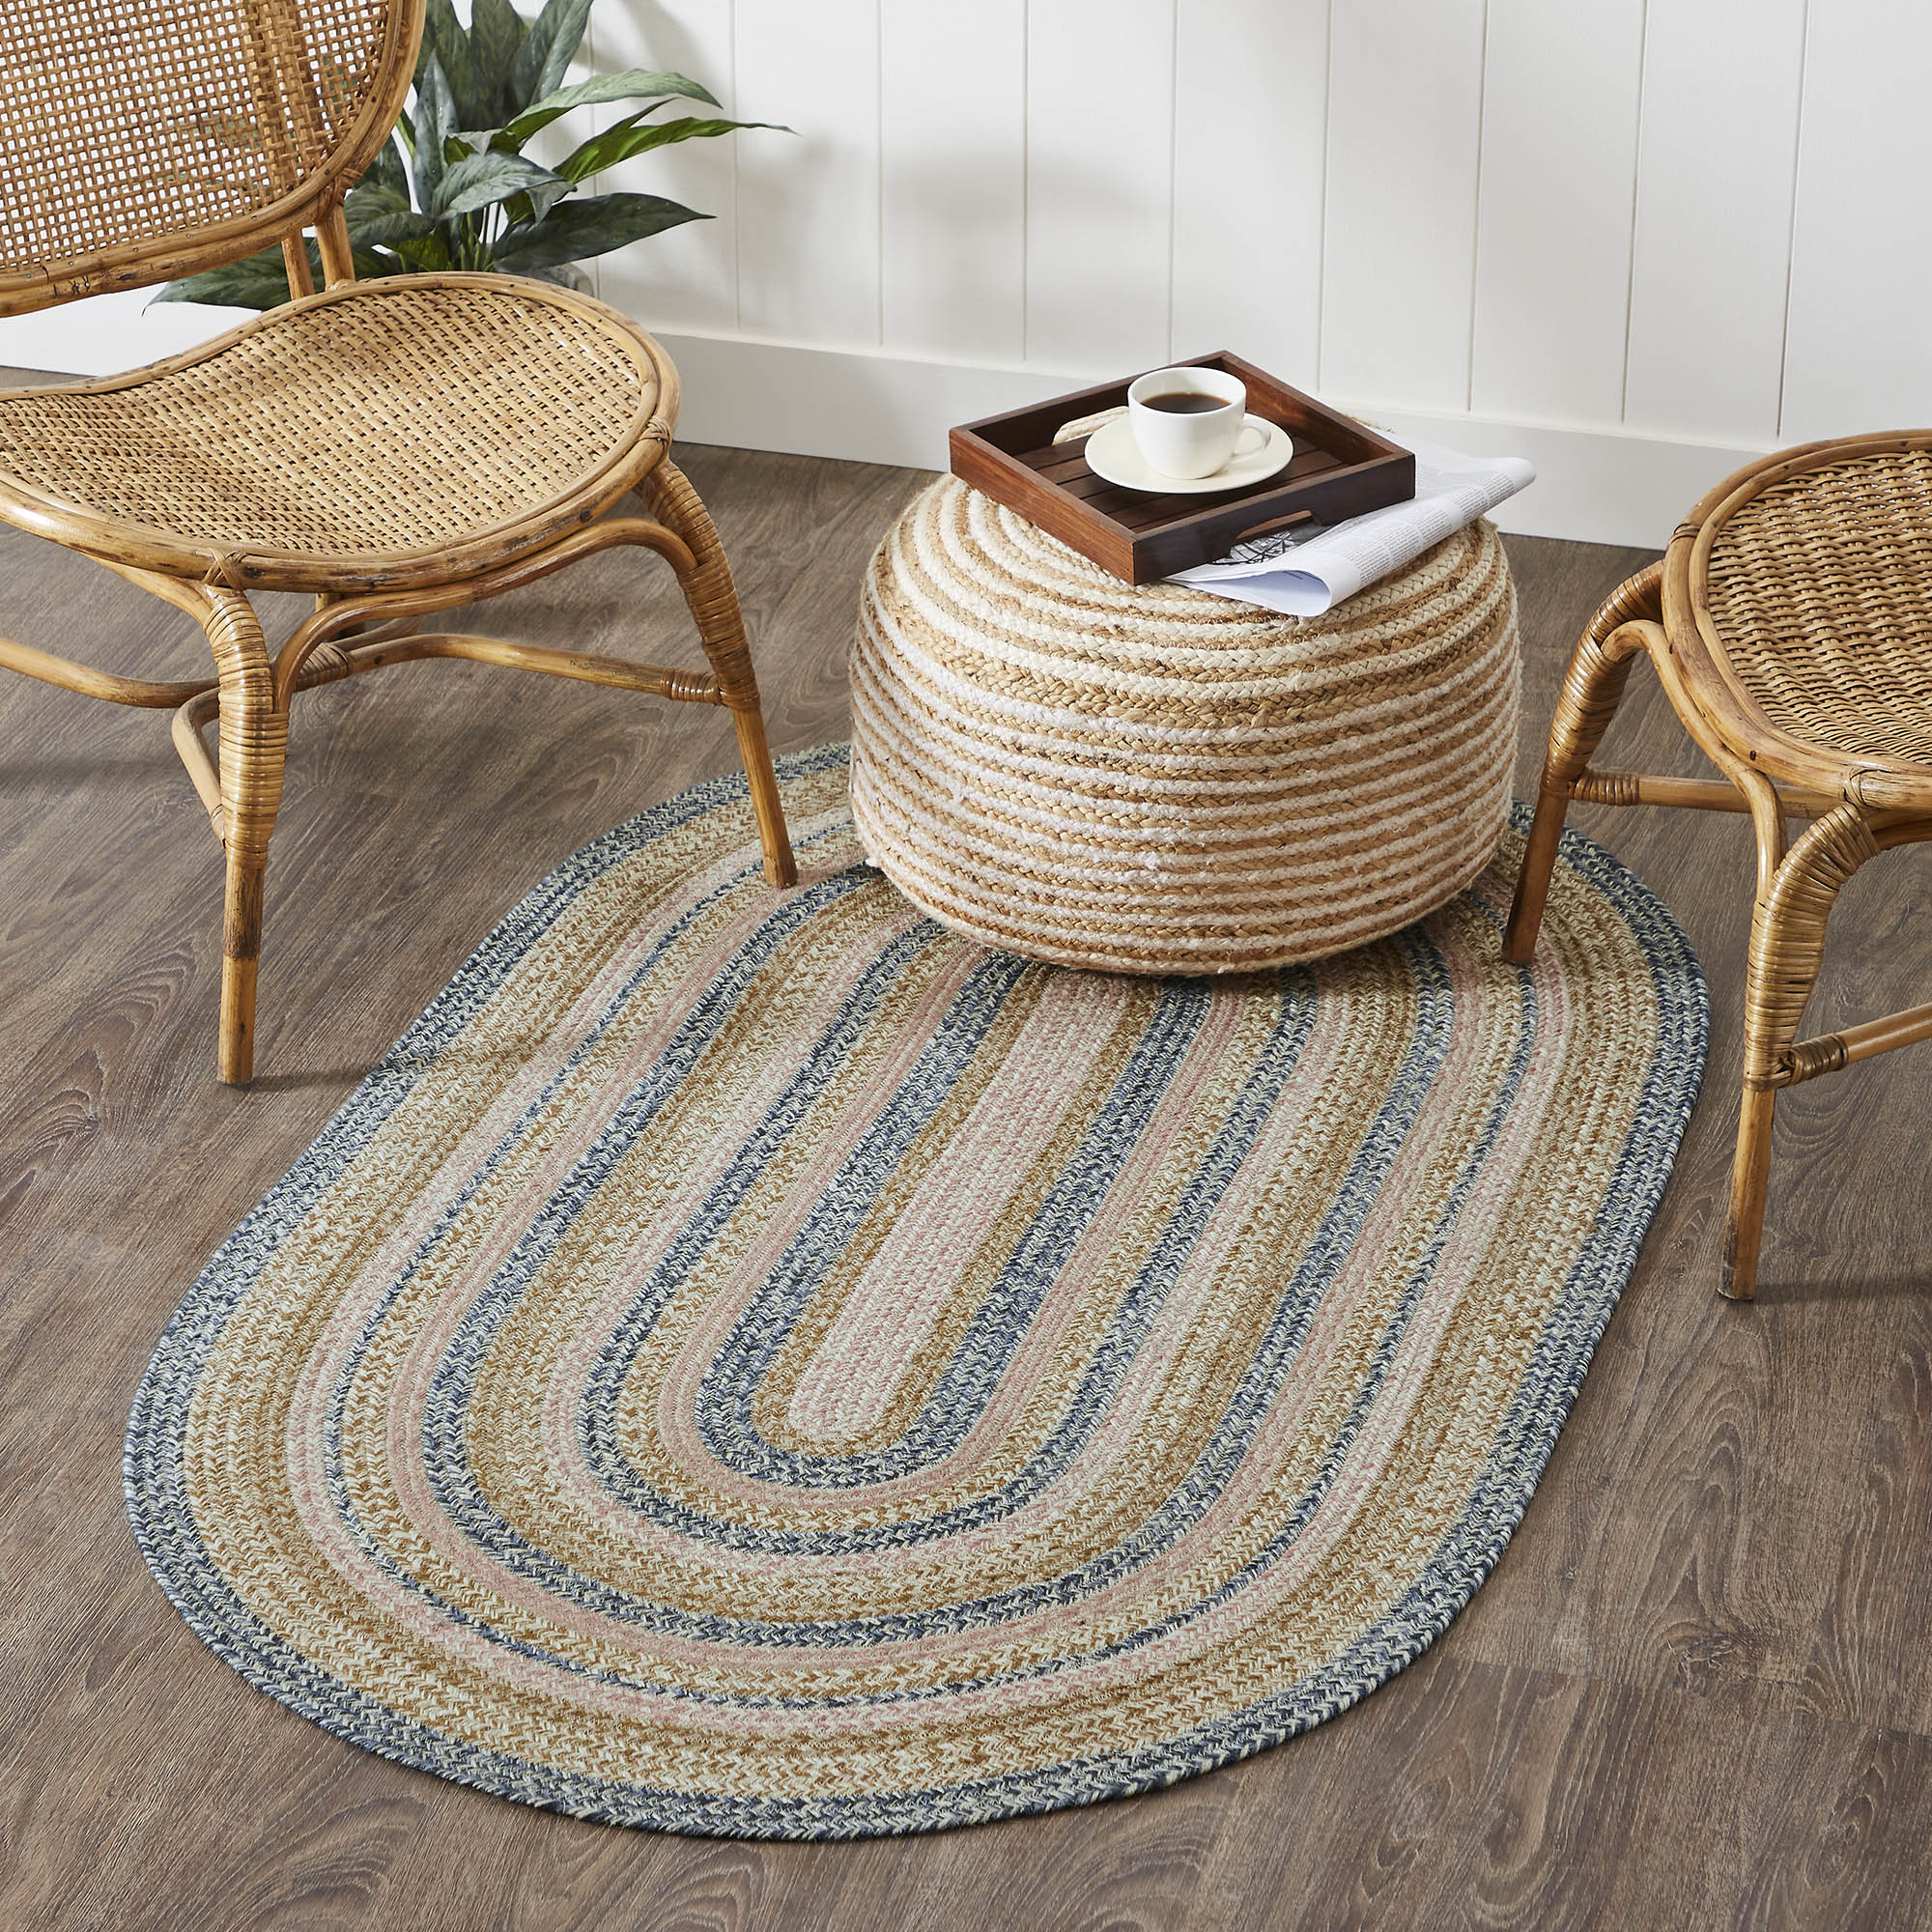 Great Falls Jute Oval Braided Rug w/ Pad - Retro Barn Country Linens